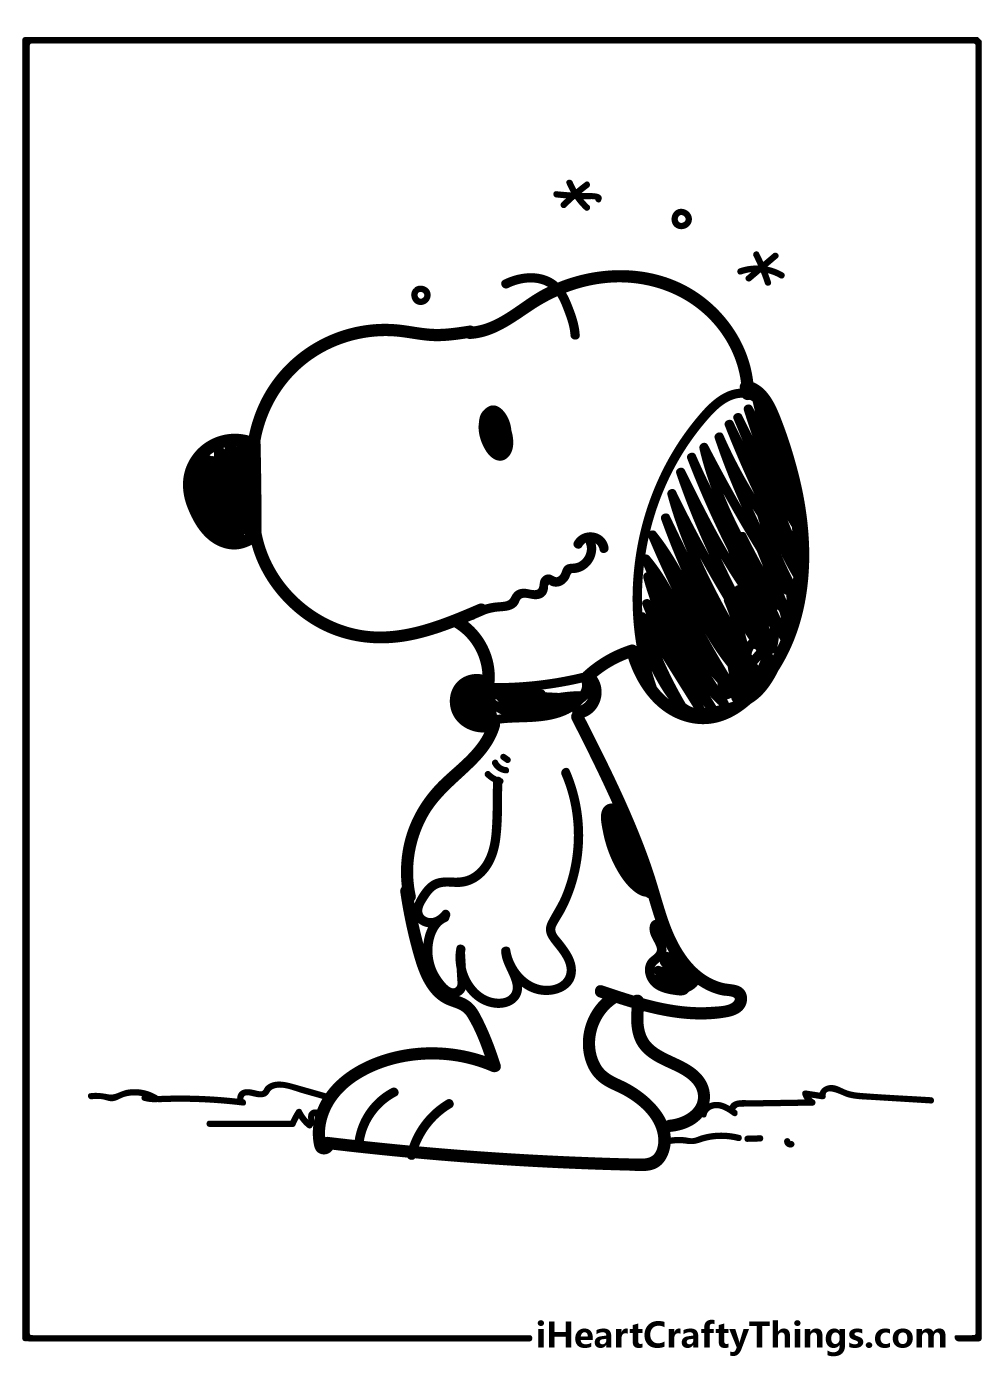 Snoopy Coloring Pages for adults free printable